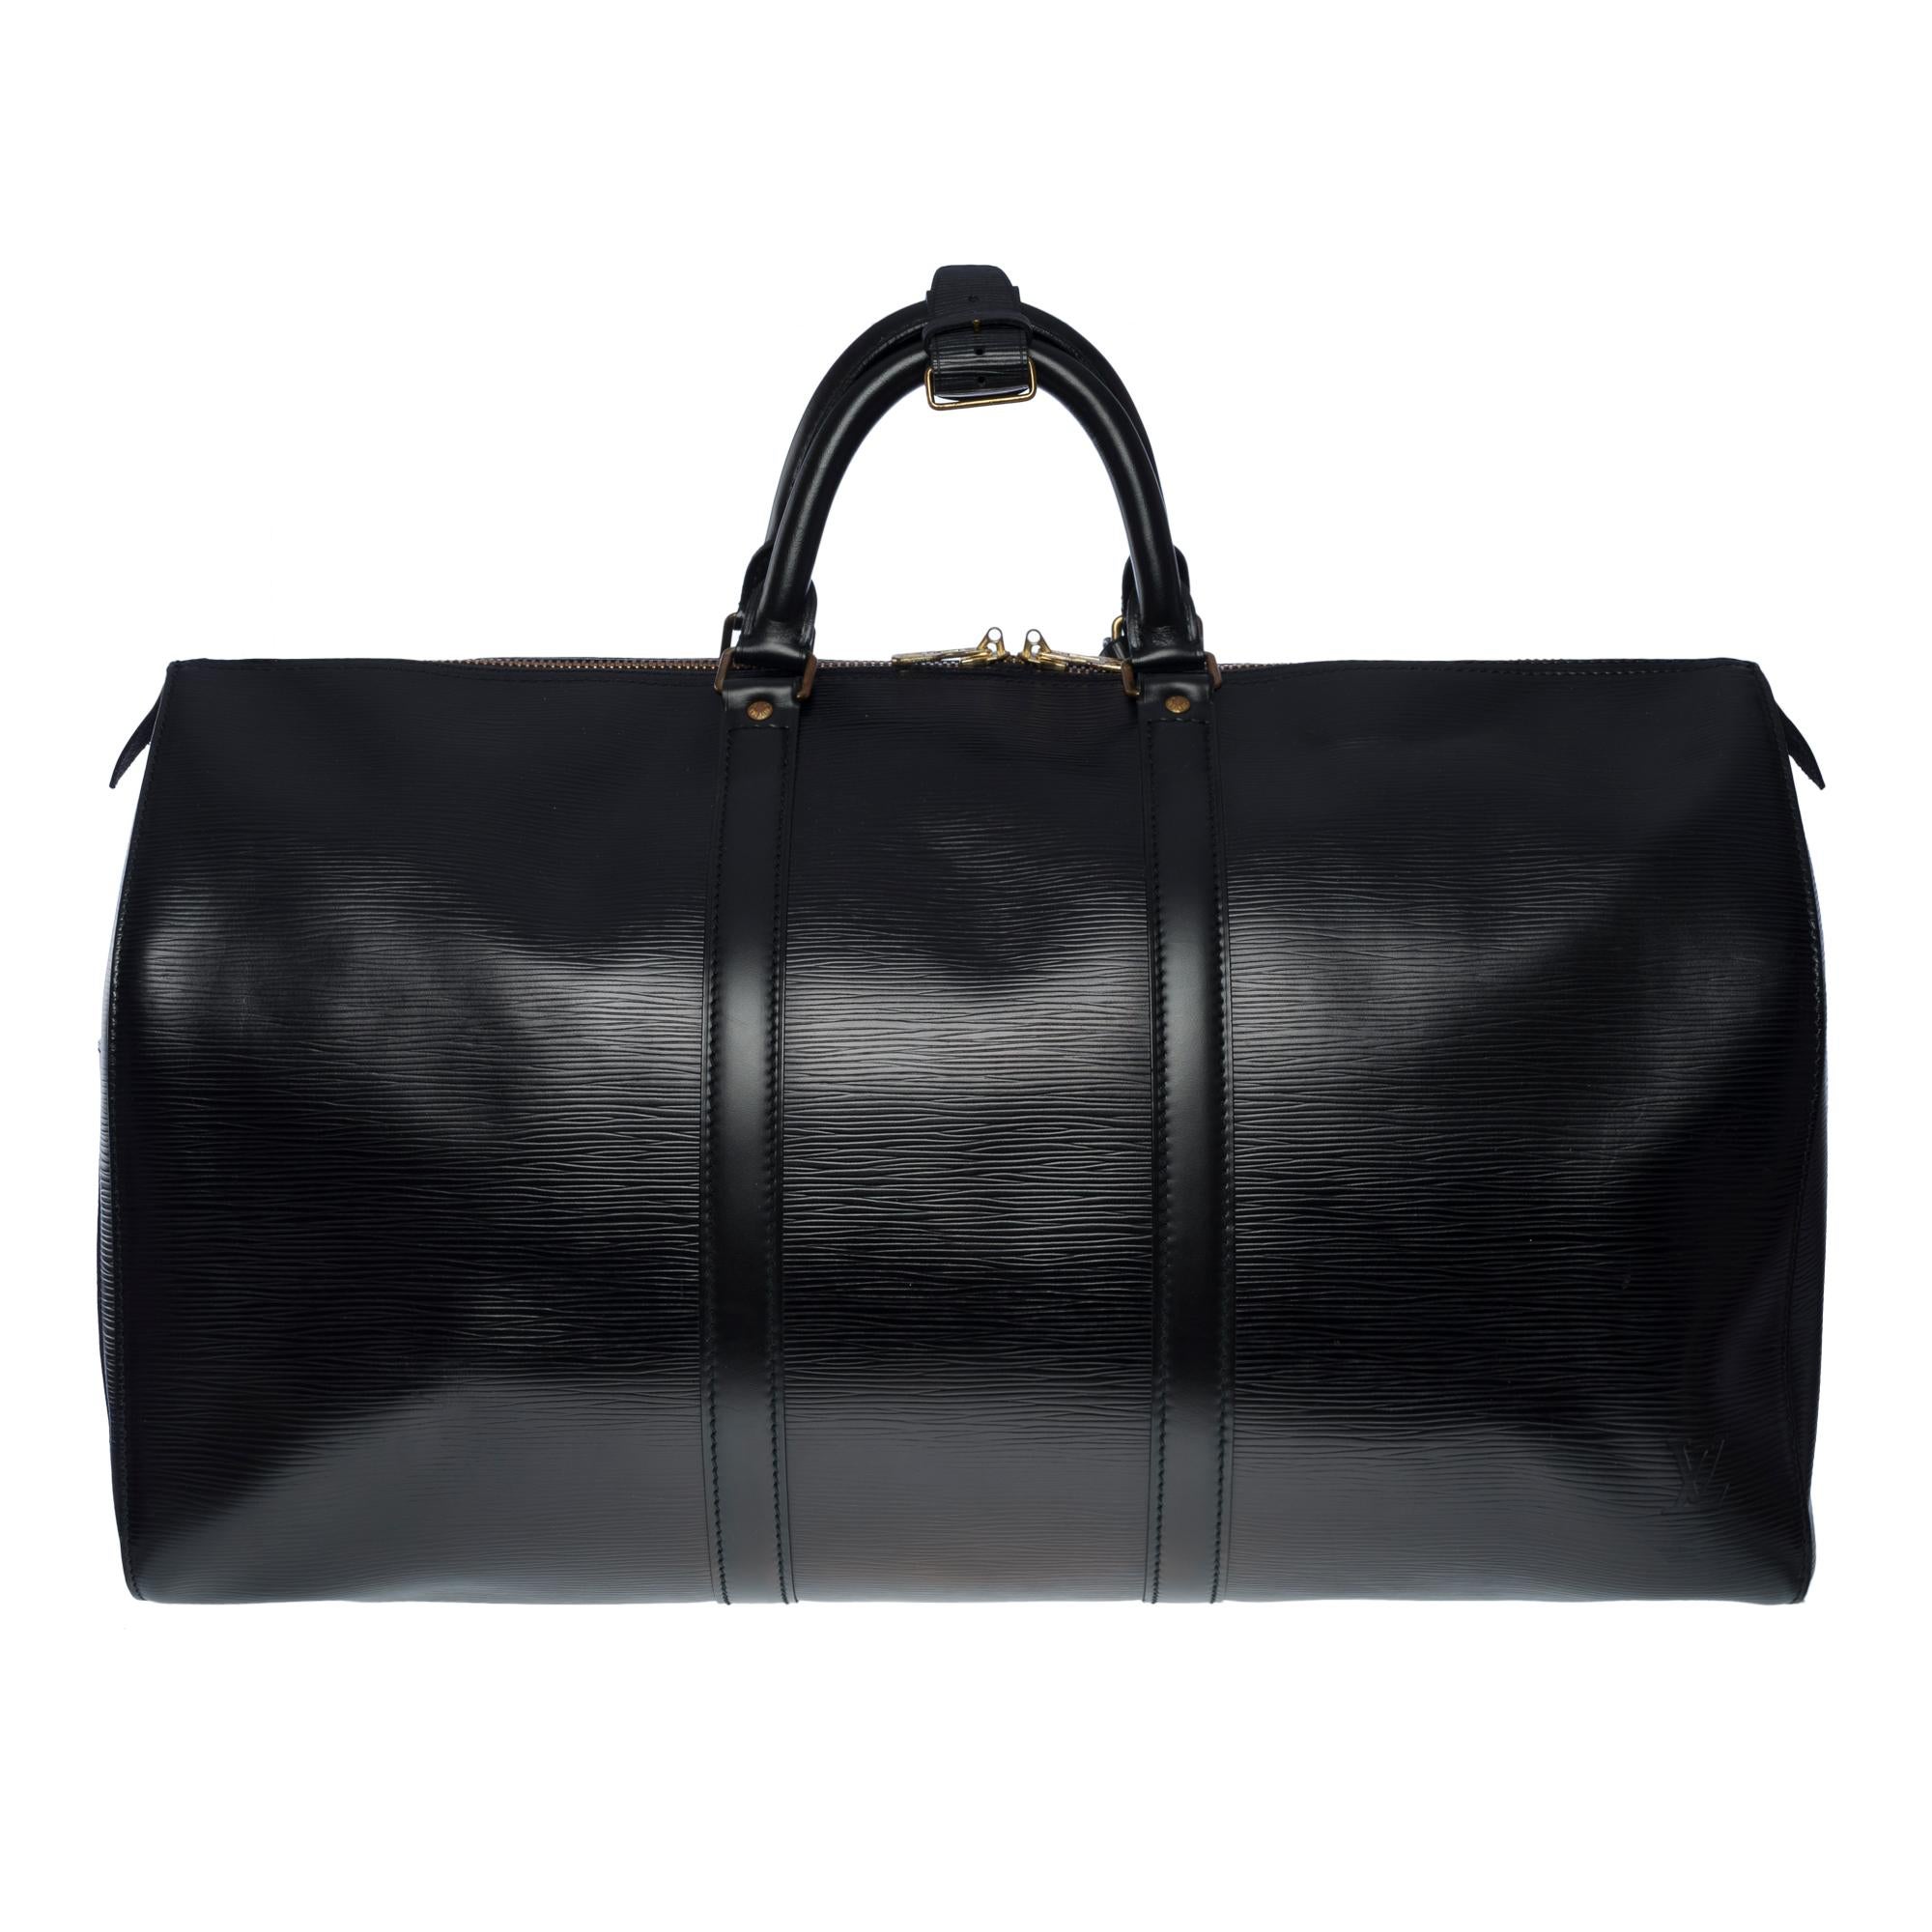 The very Chic Louis Vuitton Keepall Travel Bag 55 cm in black leather, double zipper sliders, double handle in black leather allowing a hand-carried
Zip closure
A left side patch pocket
Black suede inner lining
Signature: “LOUIS VUITTON, Made in